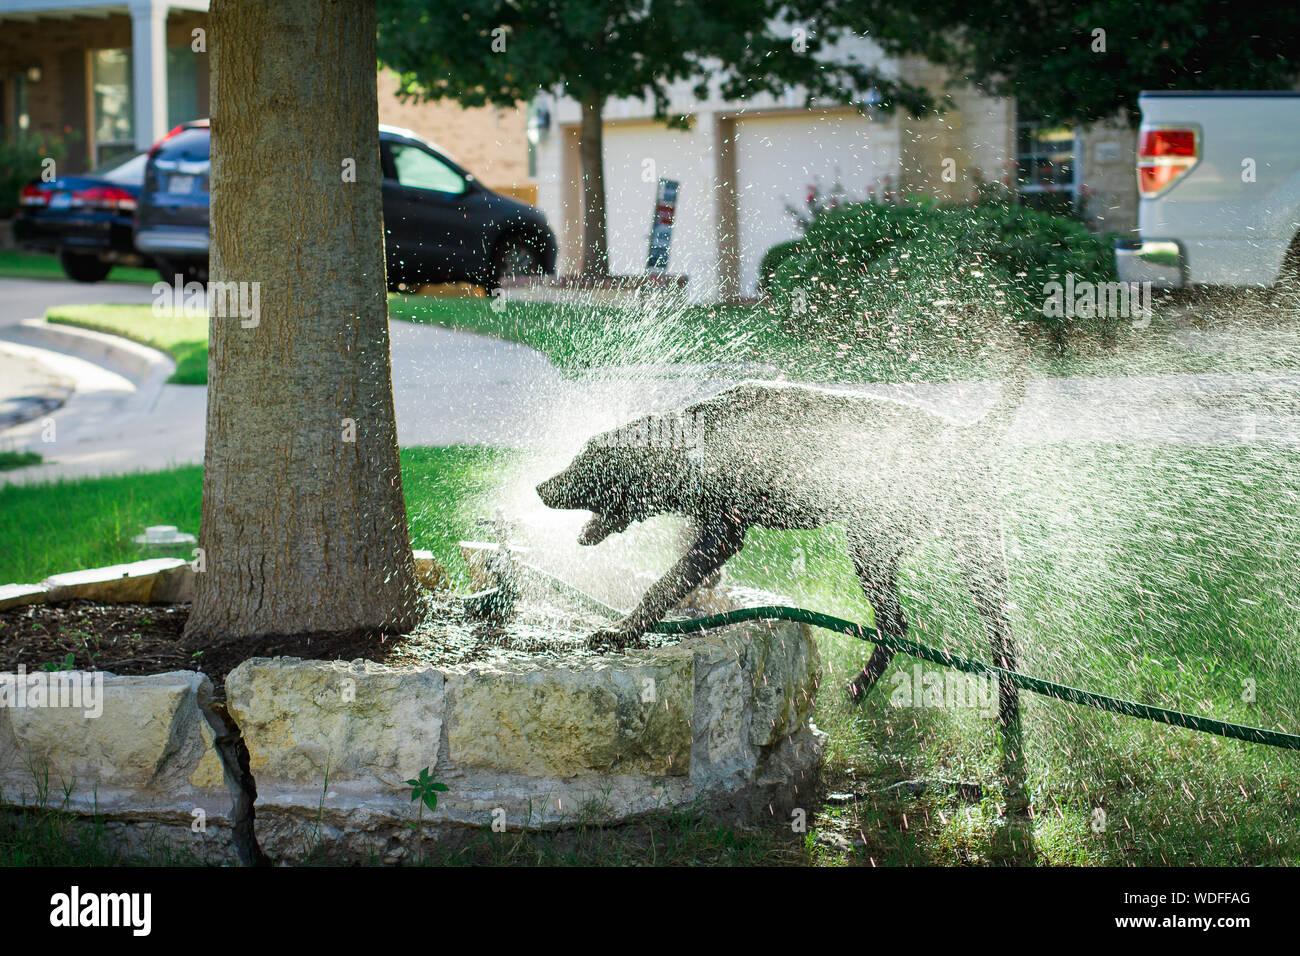 Water From Faucet Splashing On Dog In Lawn Stock Photo 266487384